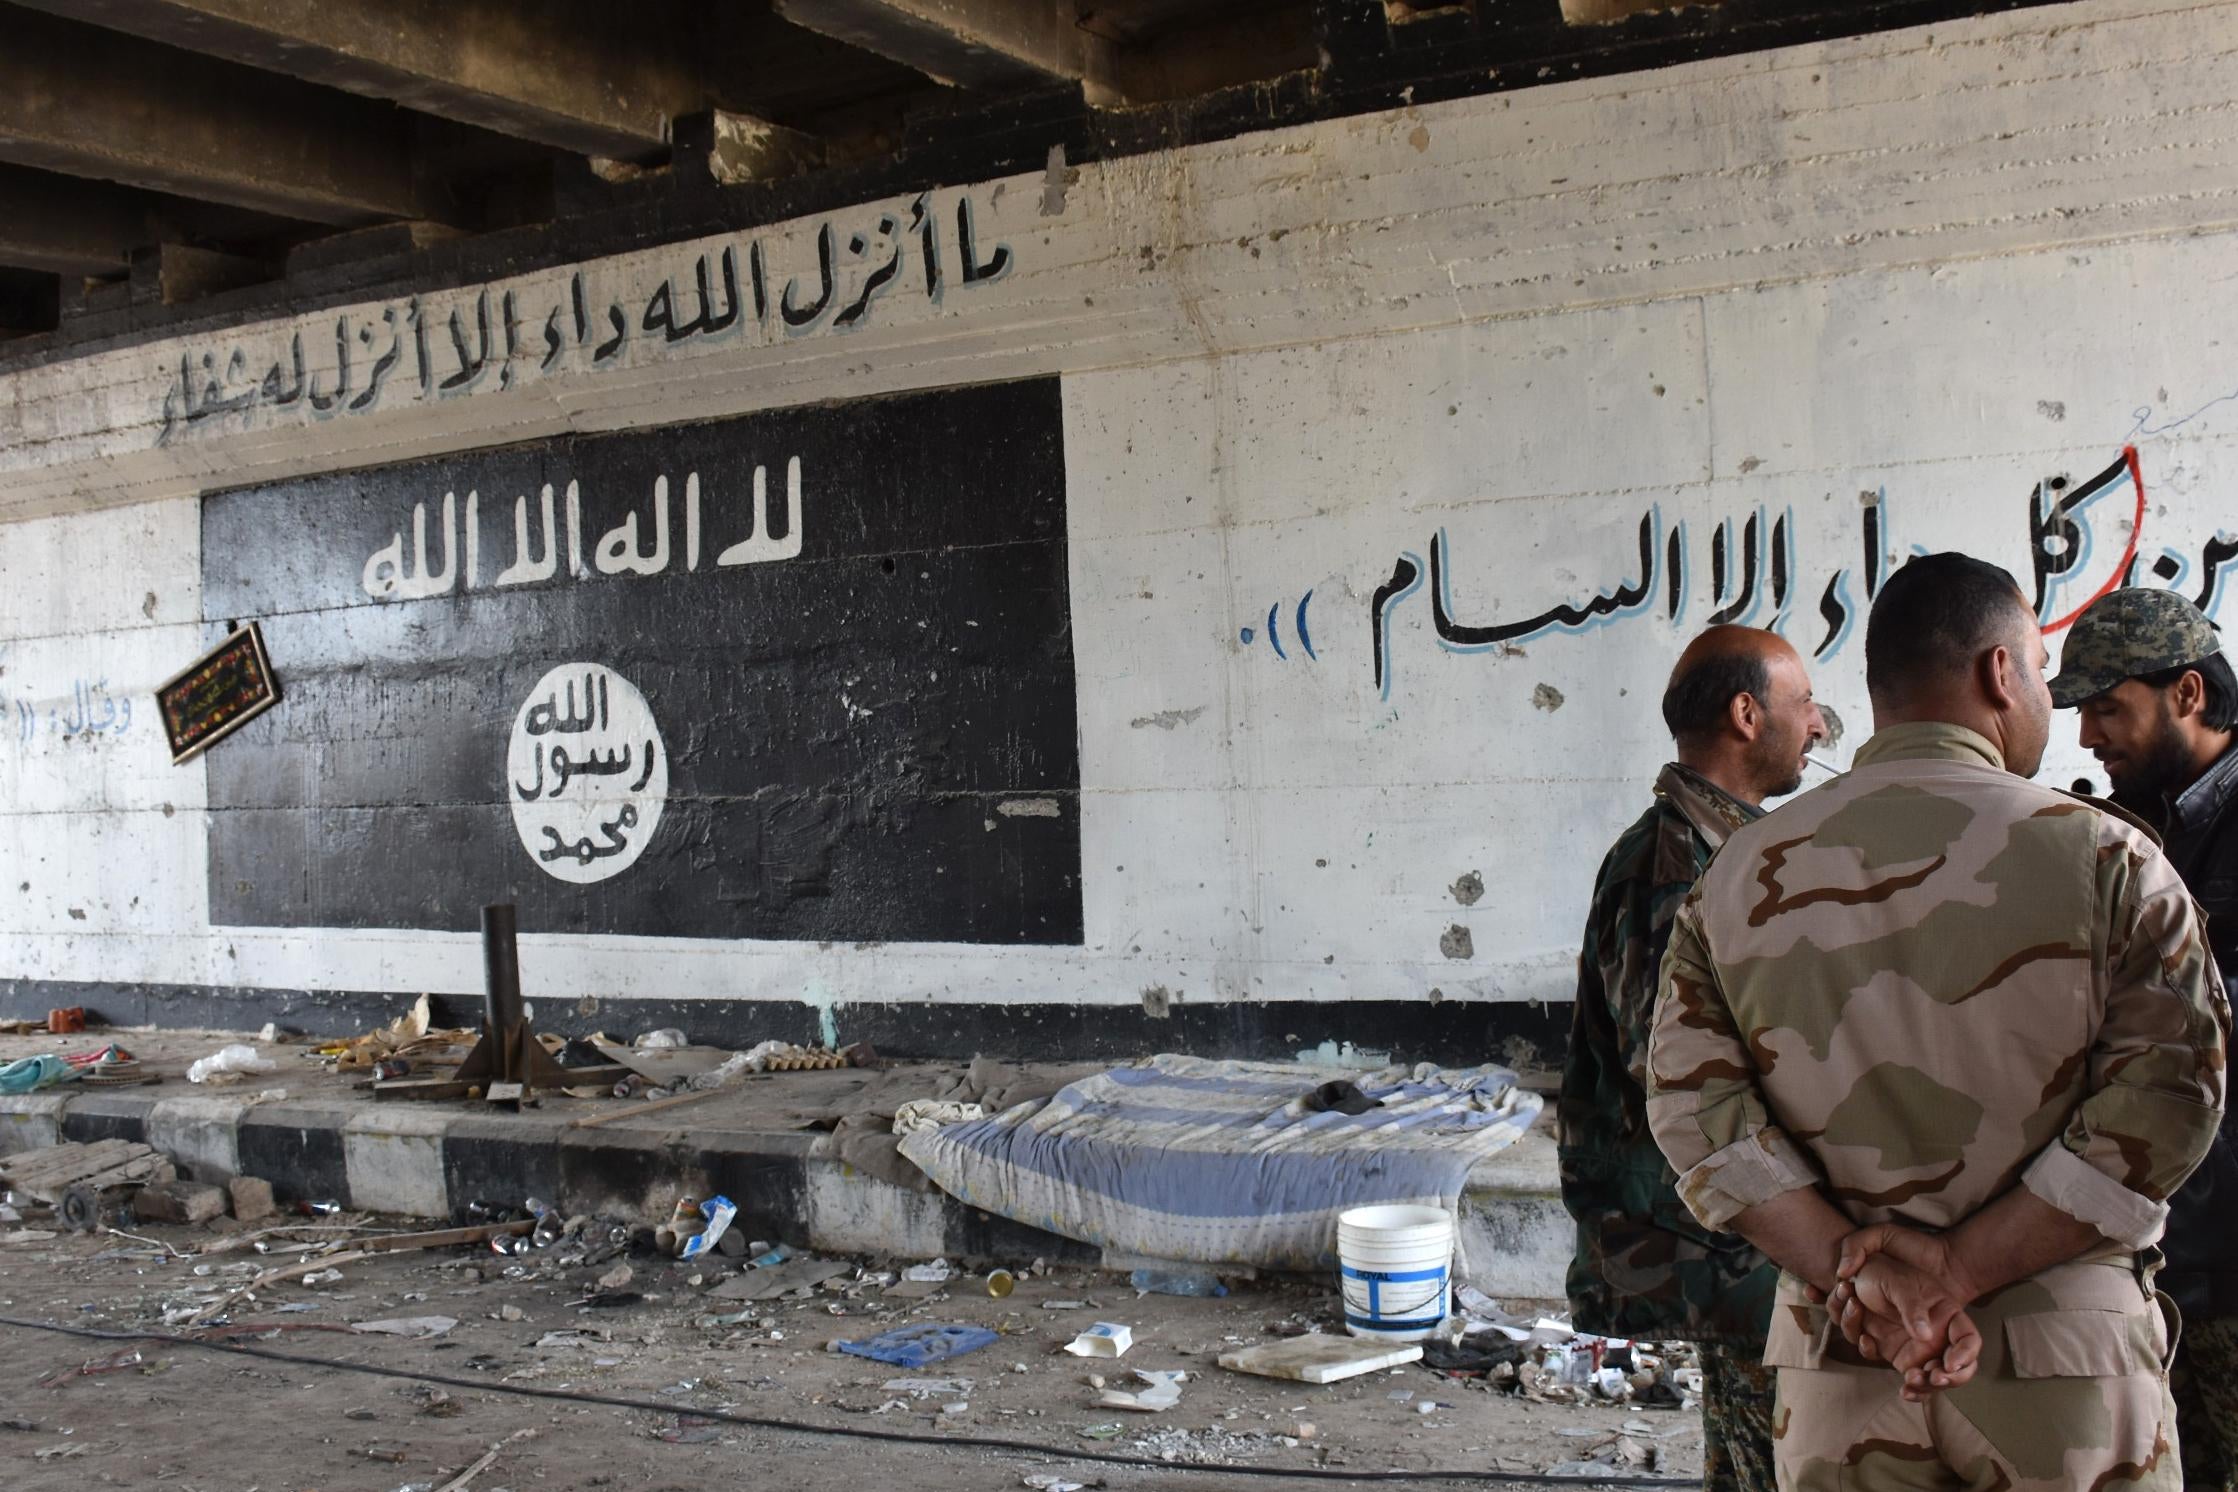 Men stand talking in a tunnel in front of a wall with graffiti of the ISIS flag.